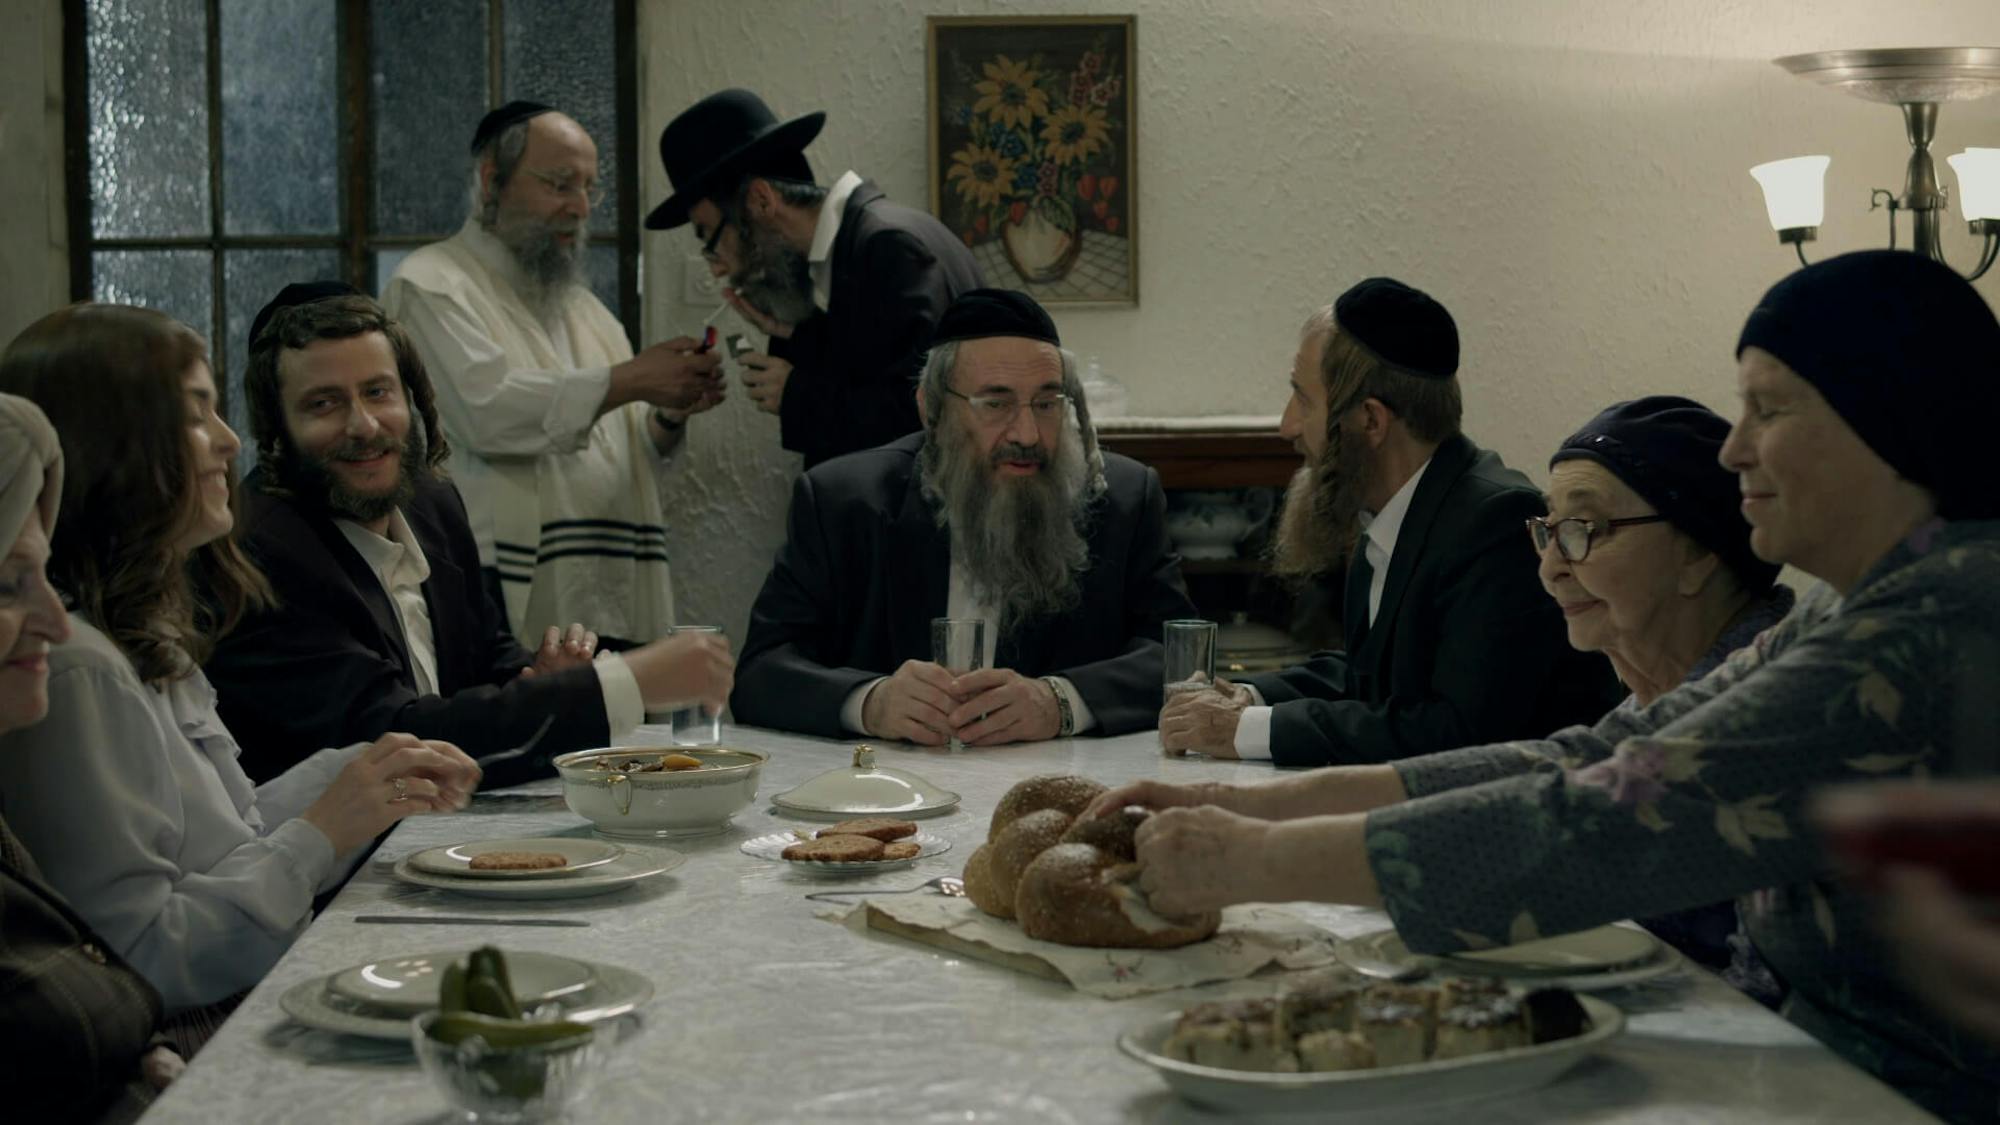 A shot from a Shtisel family meal. Shulem sits at the head, and the guests chat amongst themselves and break into the challah. The scene is lit by a small lamp.